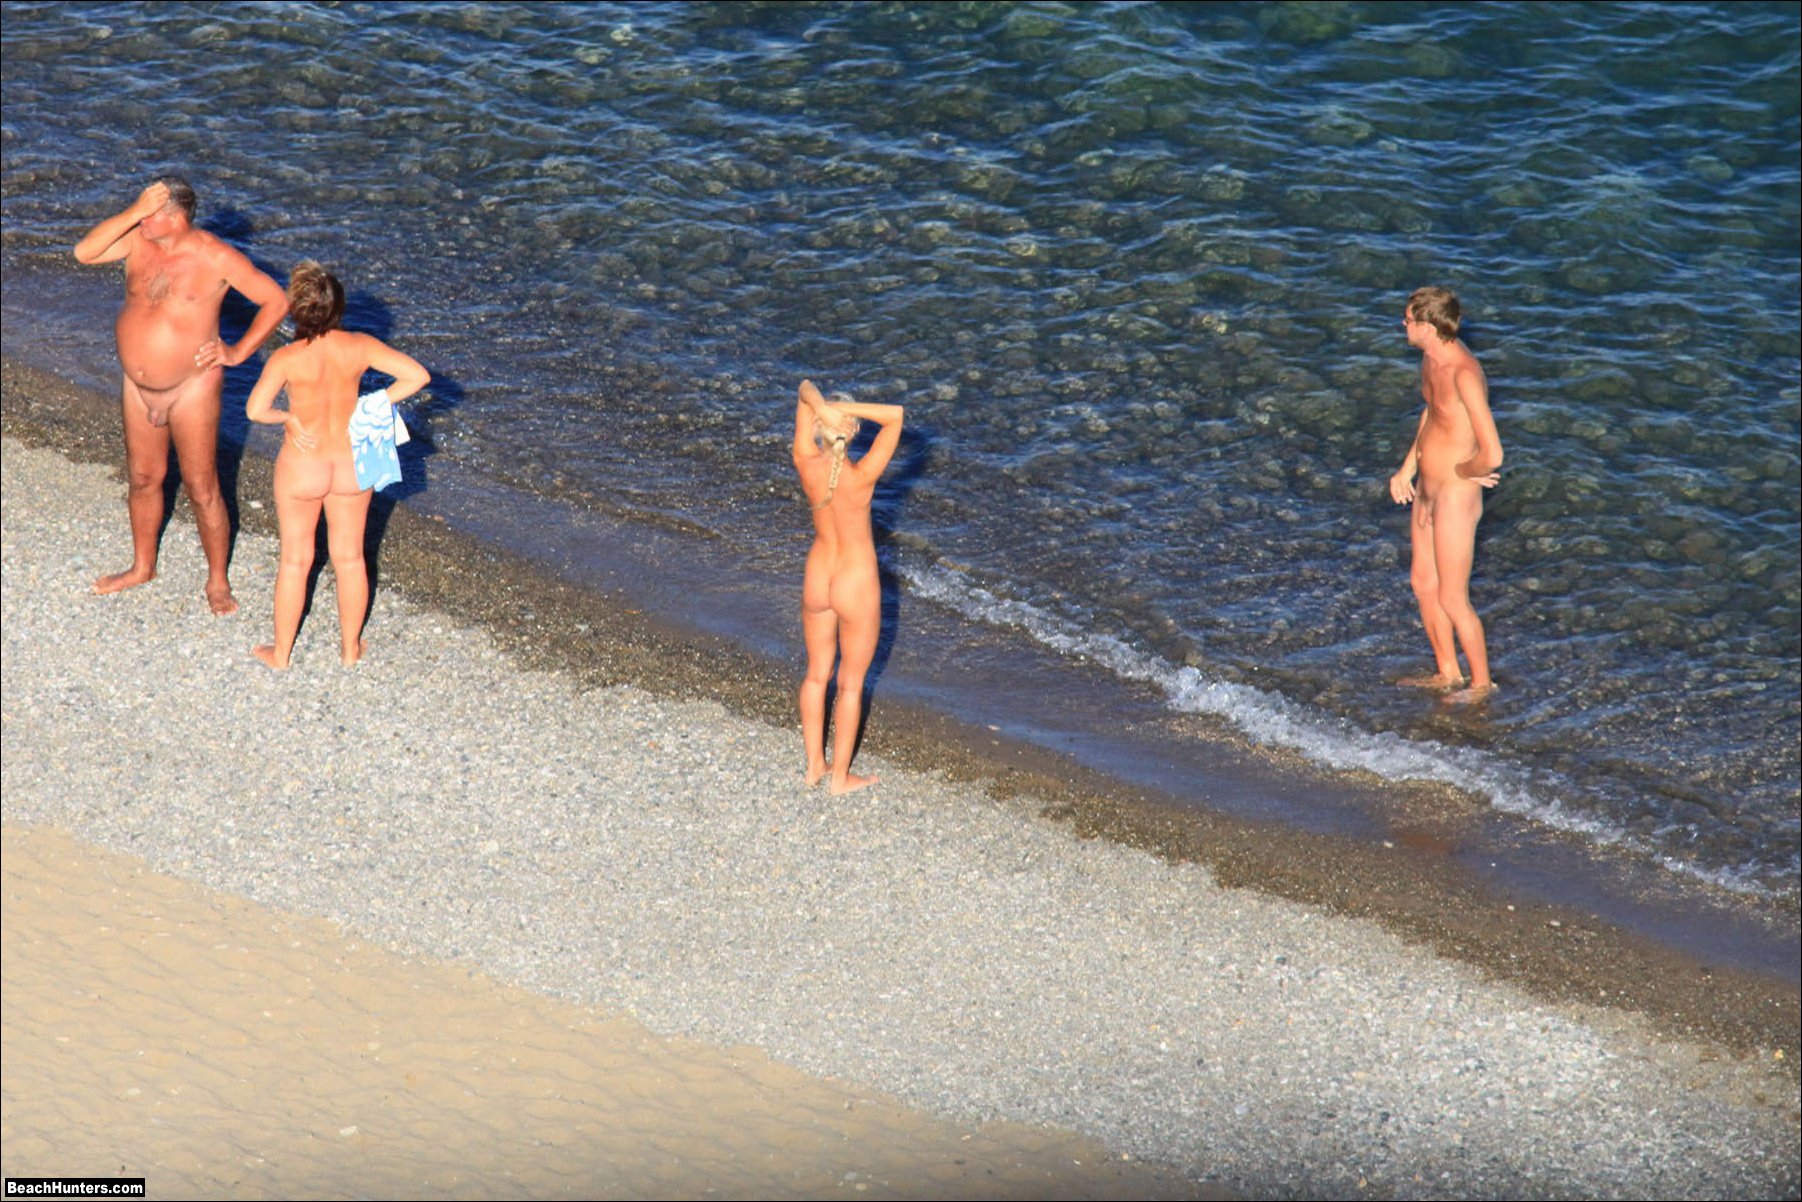 Girl like nude in public place - Nudism, Beach images - Page